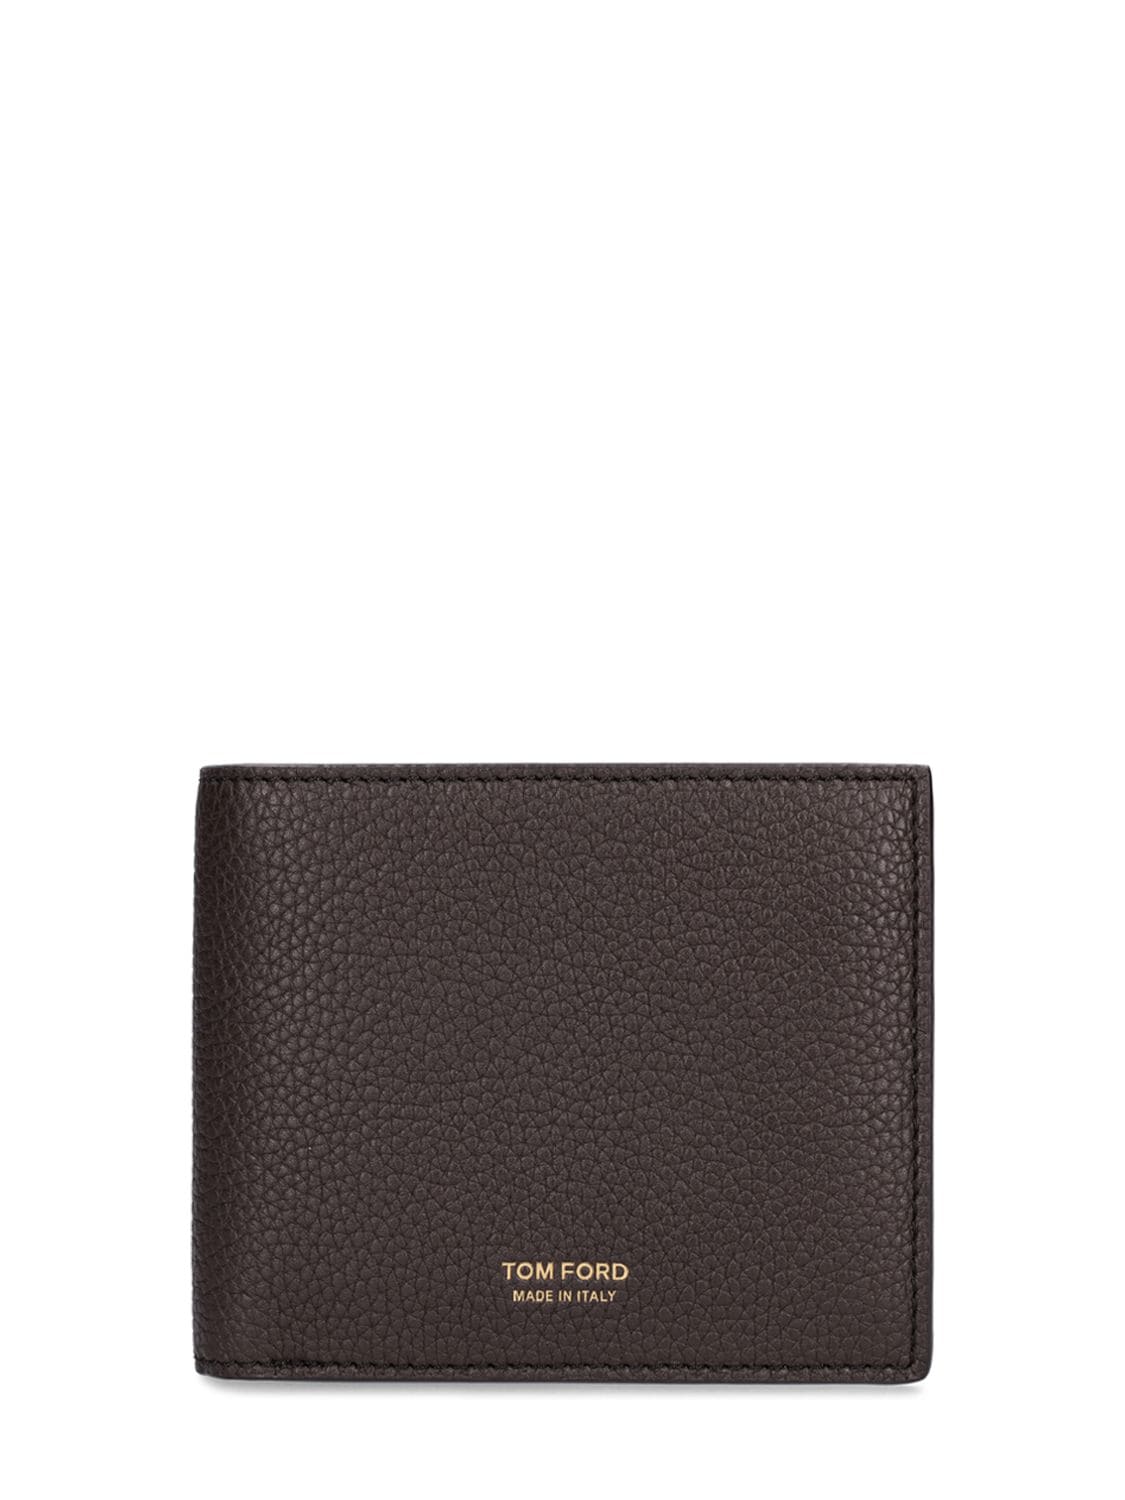 Tom Ford Soft Grain Leather Wallet In Chocolate